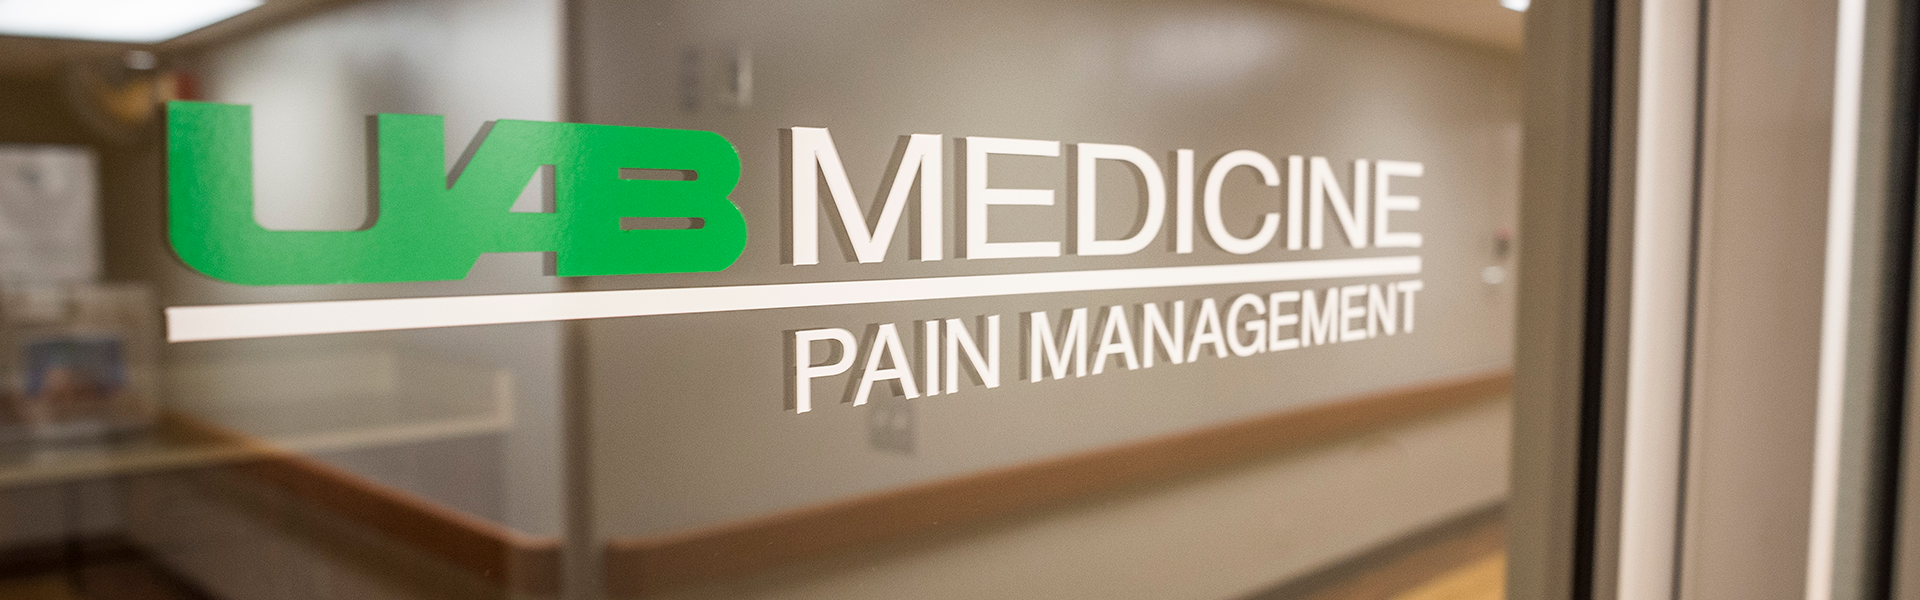 UAB among first in Alabama to offer new treatment for chronic pain